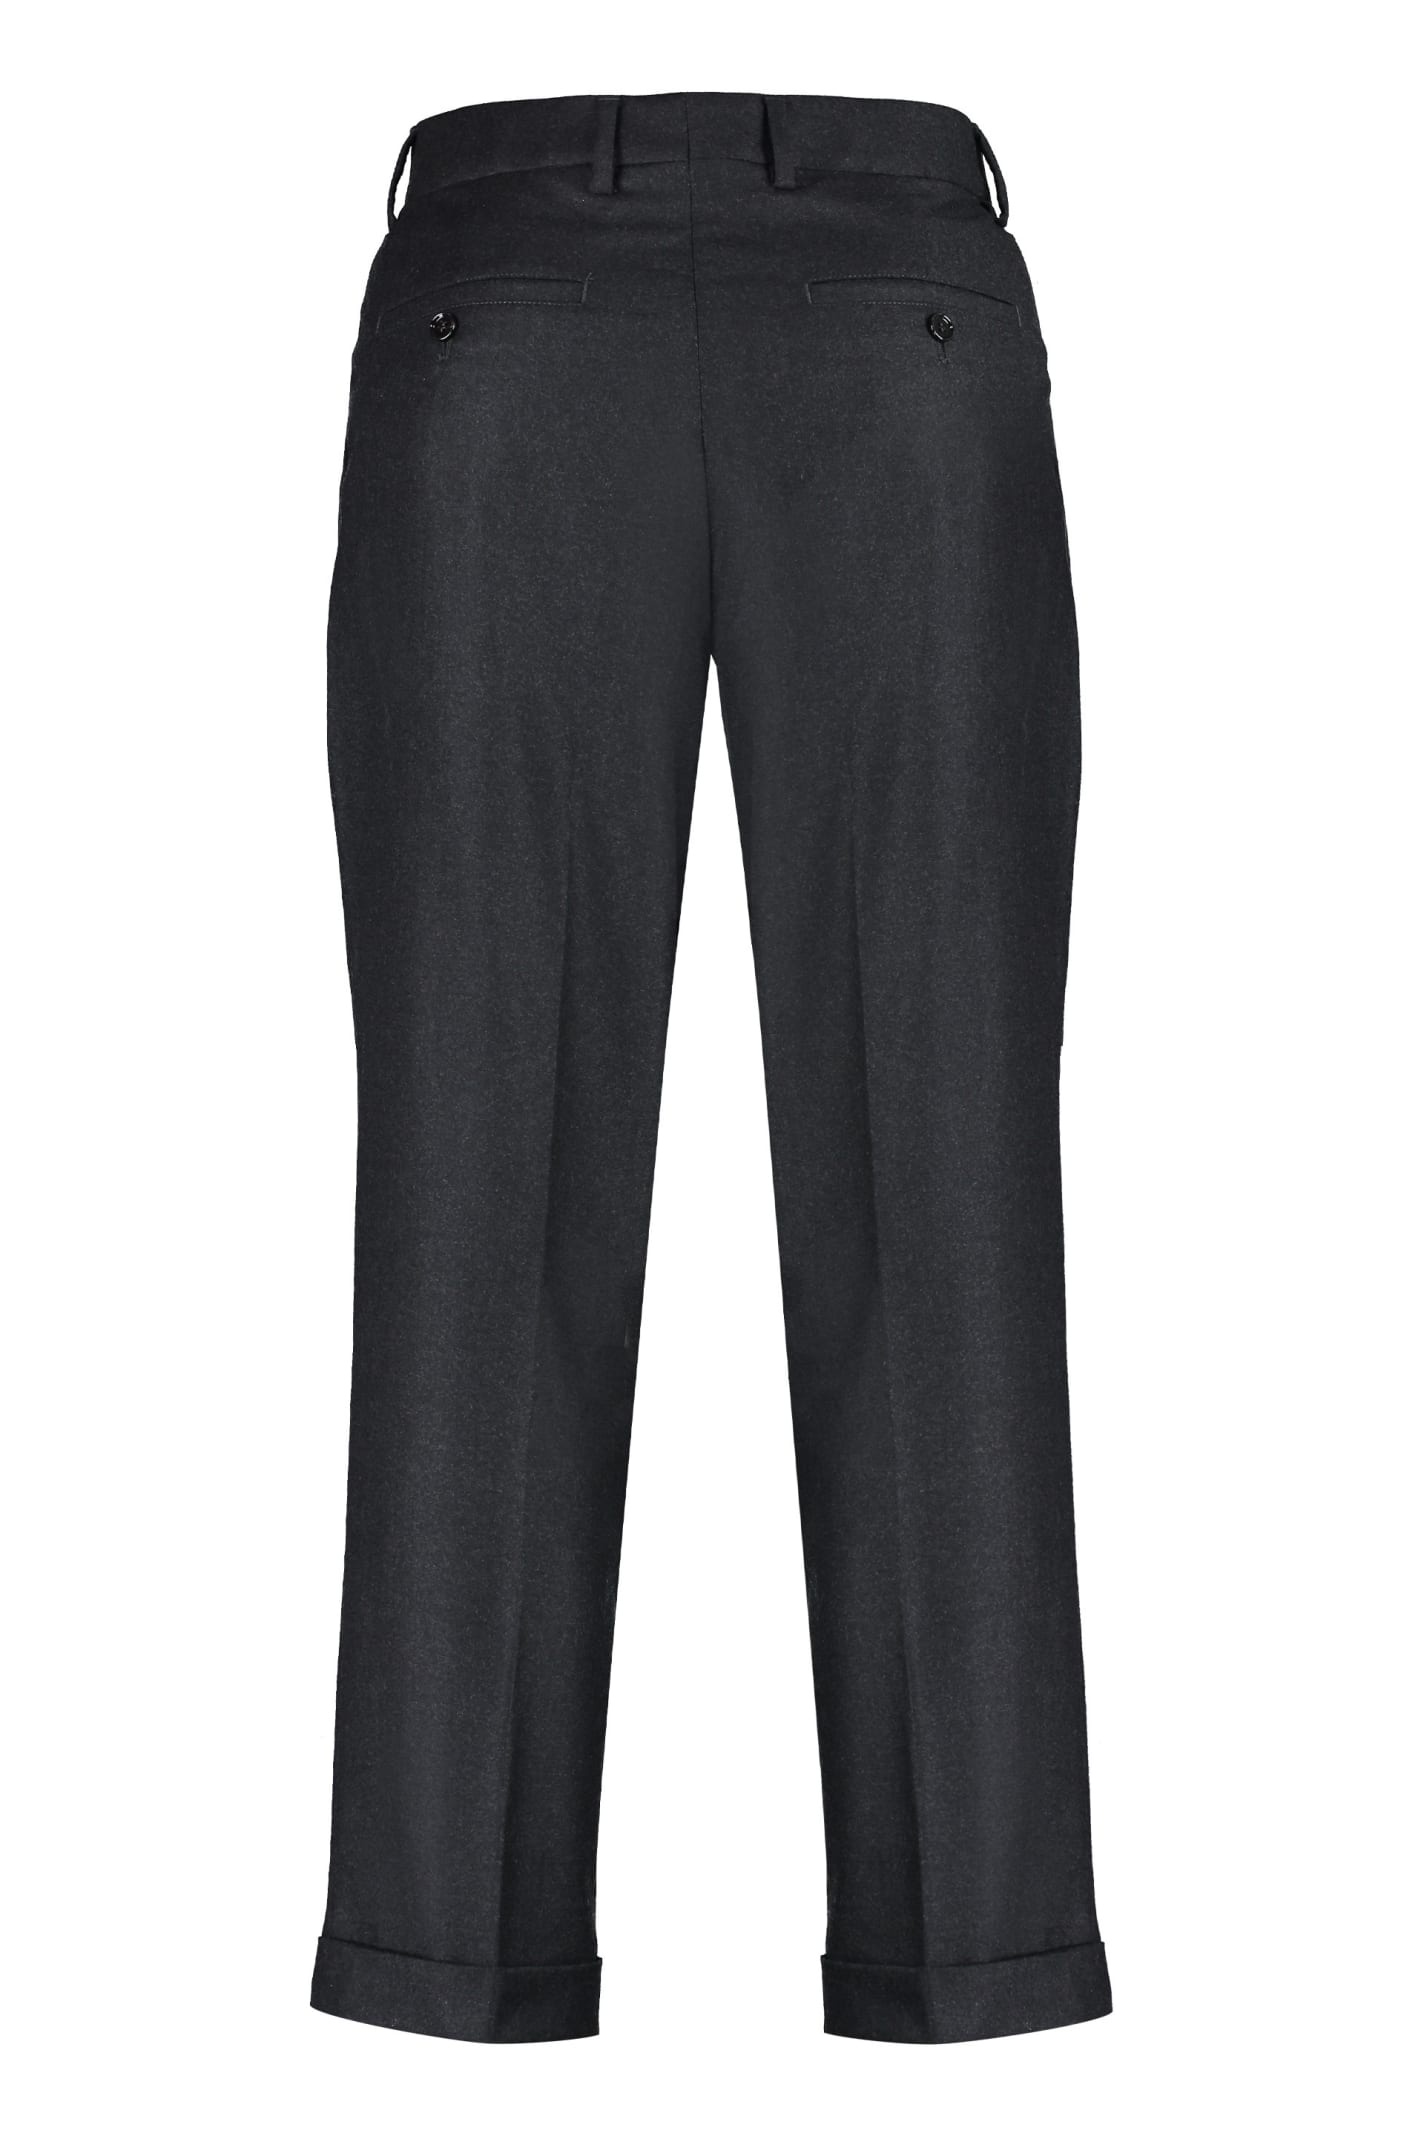 Shop Ami Alexandre Mattiussi Wool Cropped Trousers In Grey